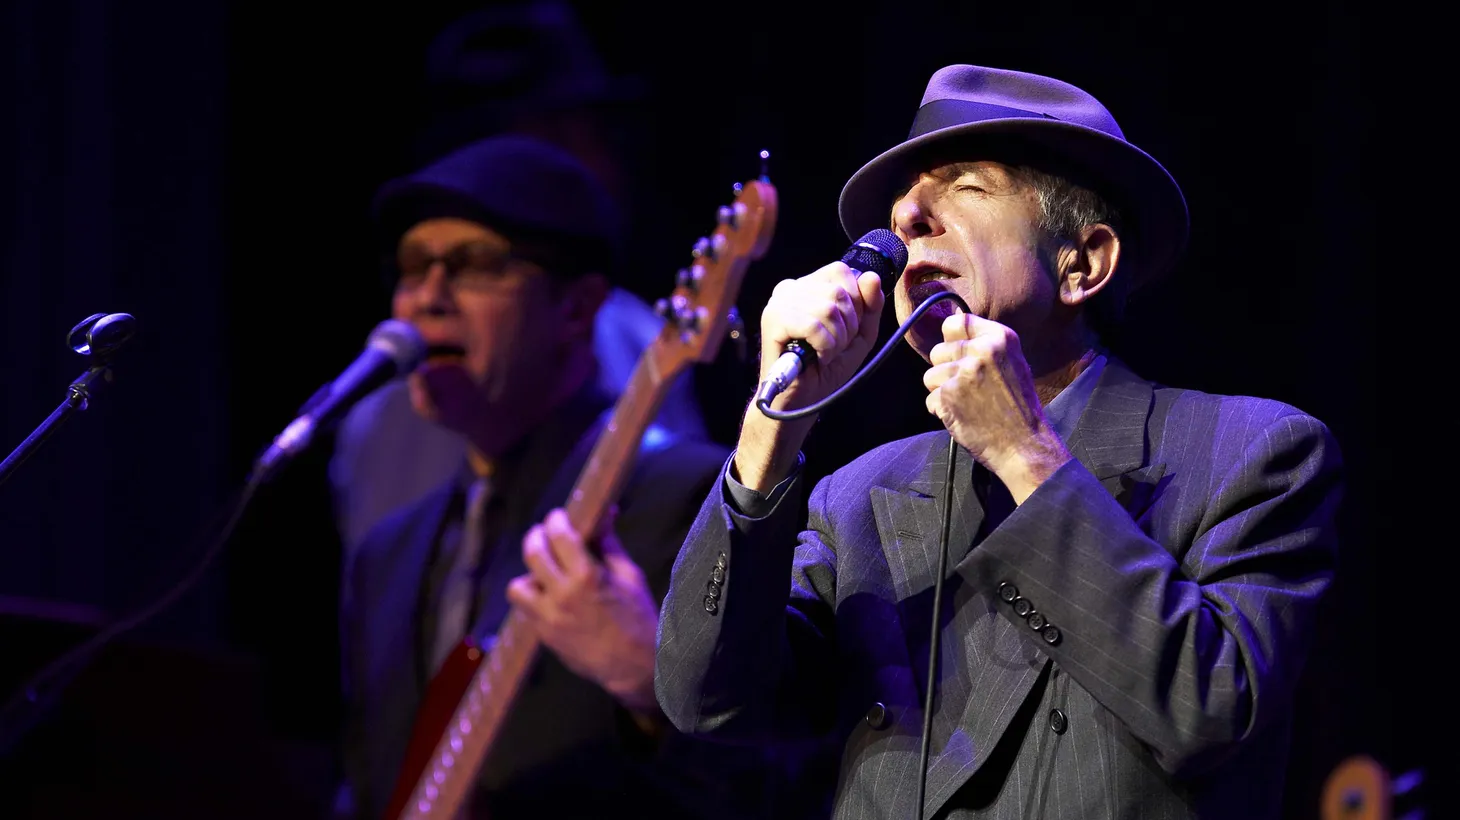 The new documentary “Hallelujah: Leonard Cohen, A Journey, A Song” tells the story of the infamous song and Cohen’s musical career. Photo by Dan Geller.